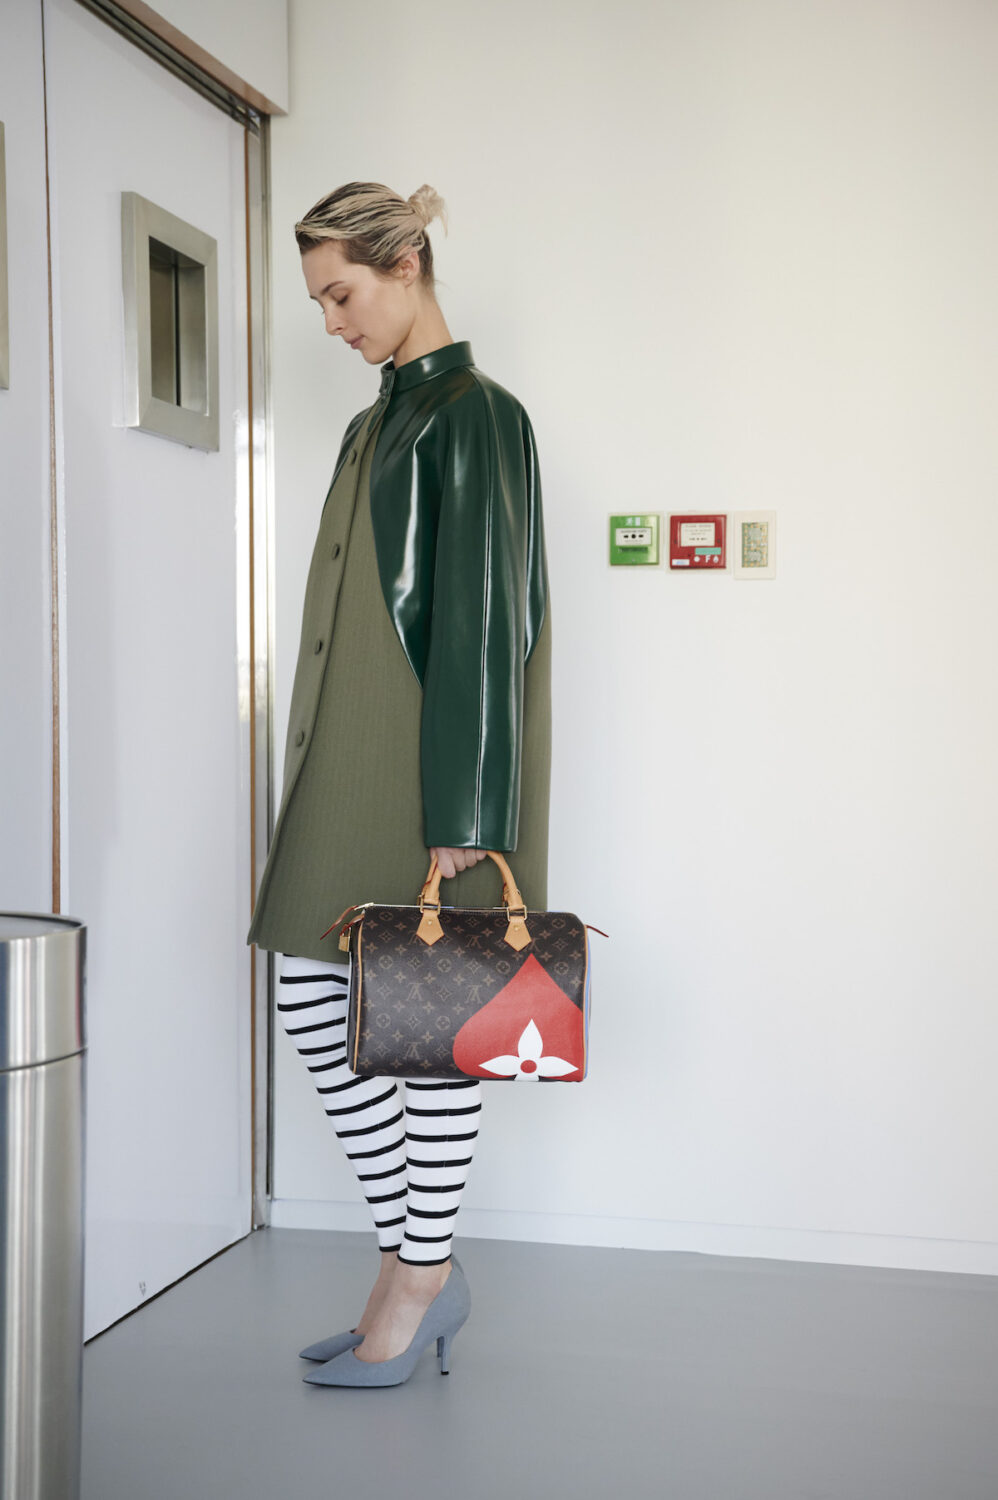 Louis Vuitton Game On Game On Cœur Bag, Cruise 2021 Collection